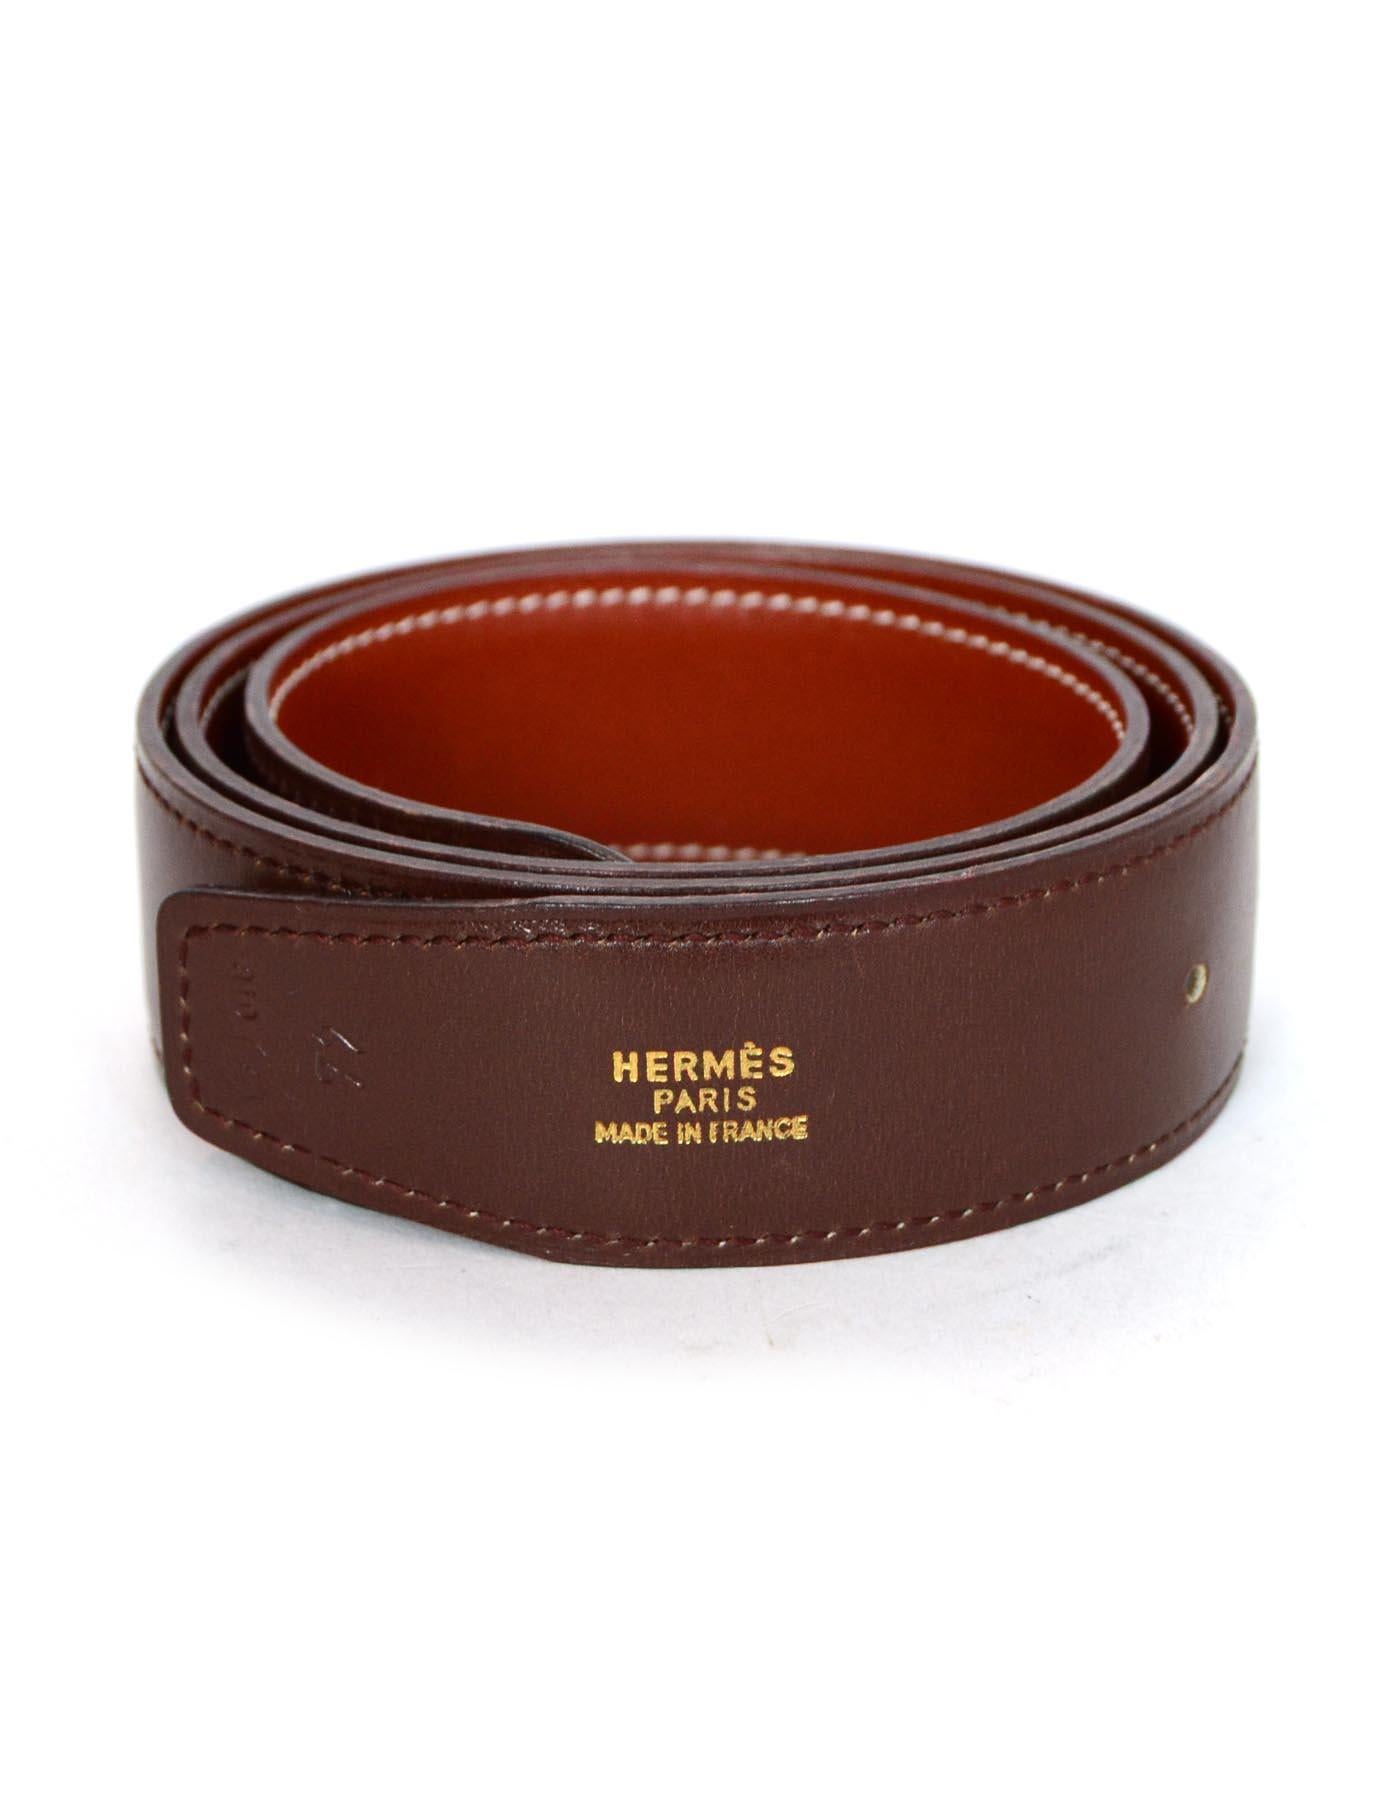 Hermes Brown/Rust Reversible Leather 32mm Belt Strap 72

Made In: France
Year Of Production: 1996 (Z in circle marking on belt)
Color: Brown and rust (on reverse side)
Hardware: No buckle included
Materials: Smooth leather
Closure/Opening: No buckle